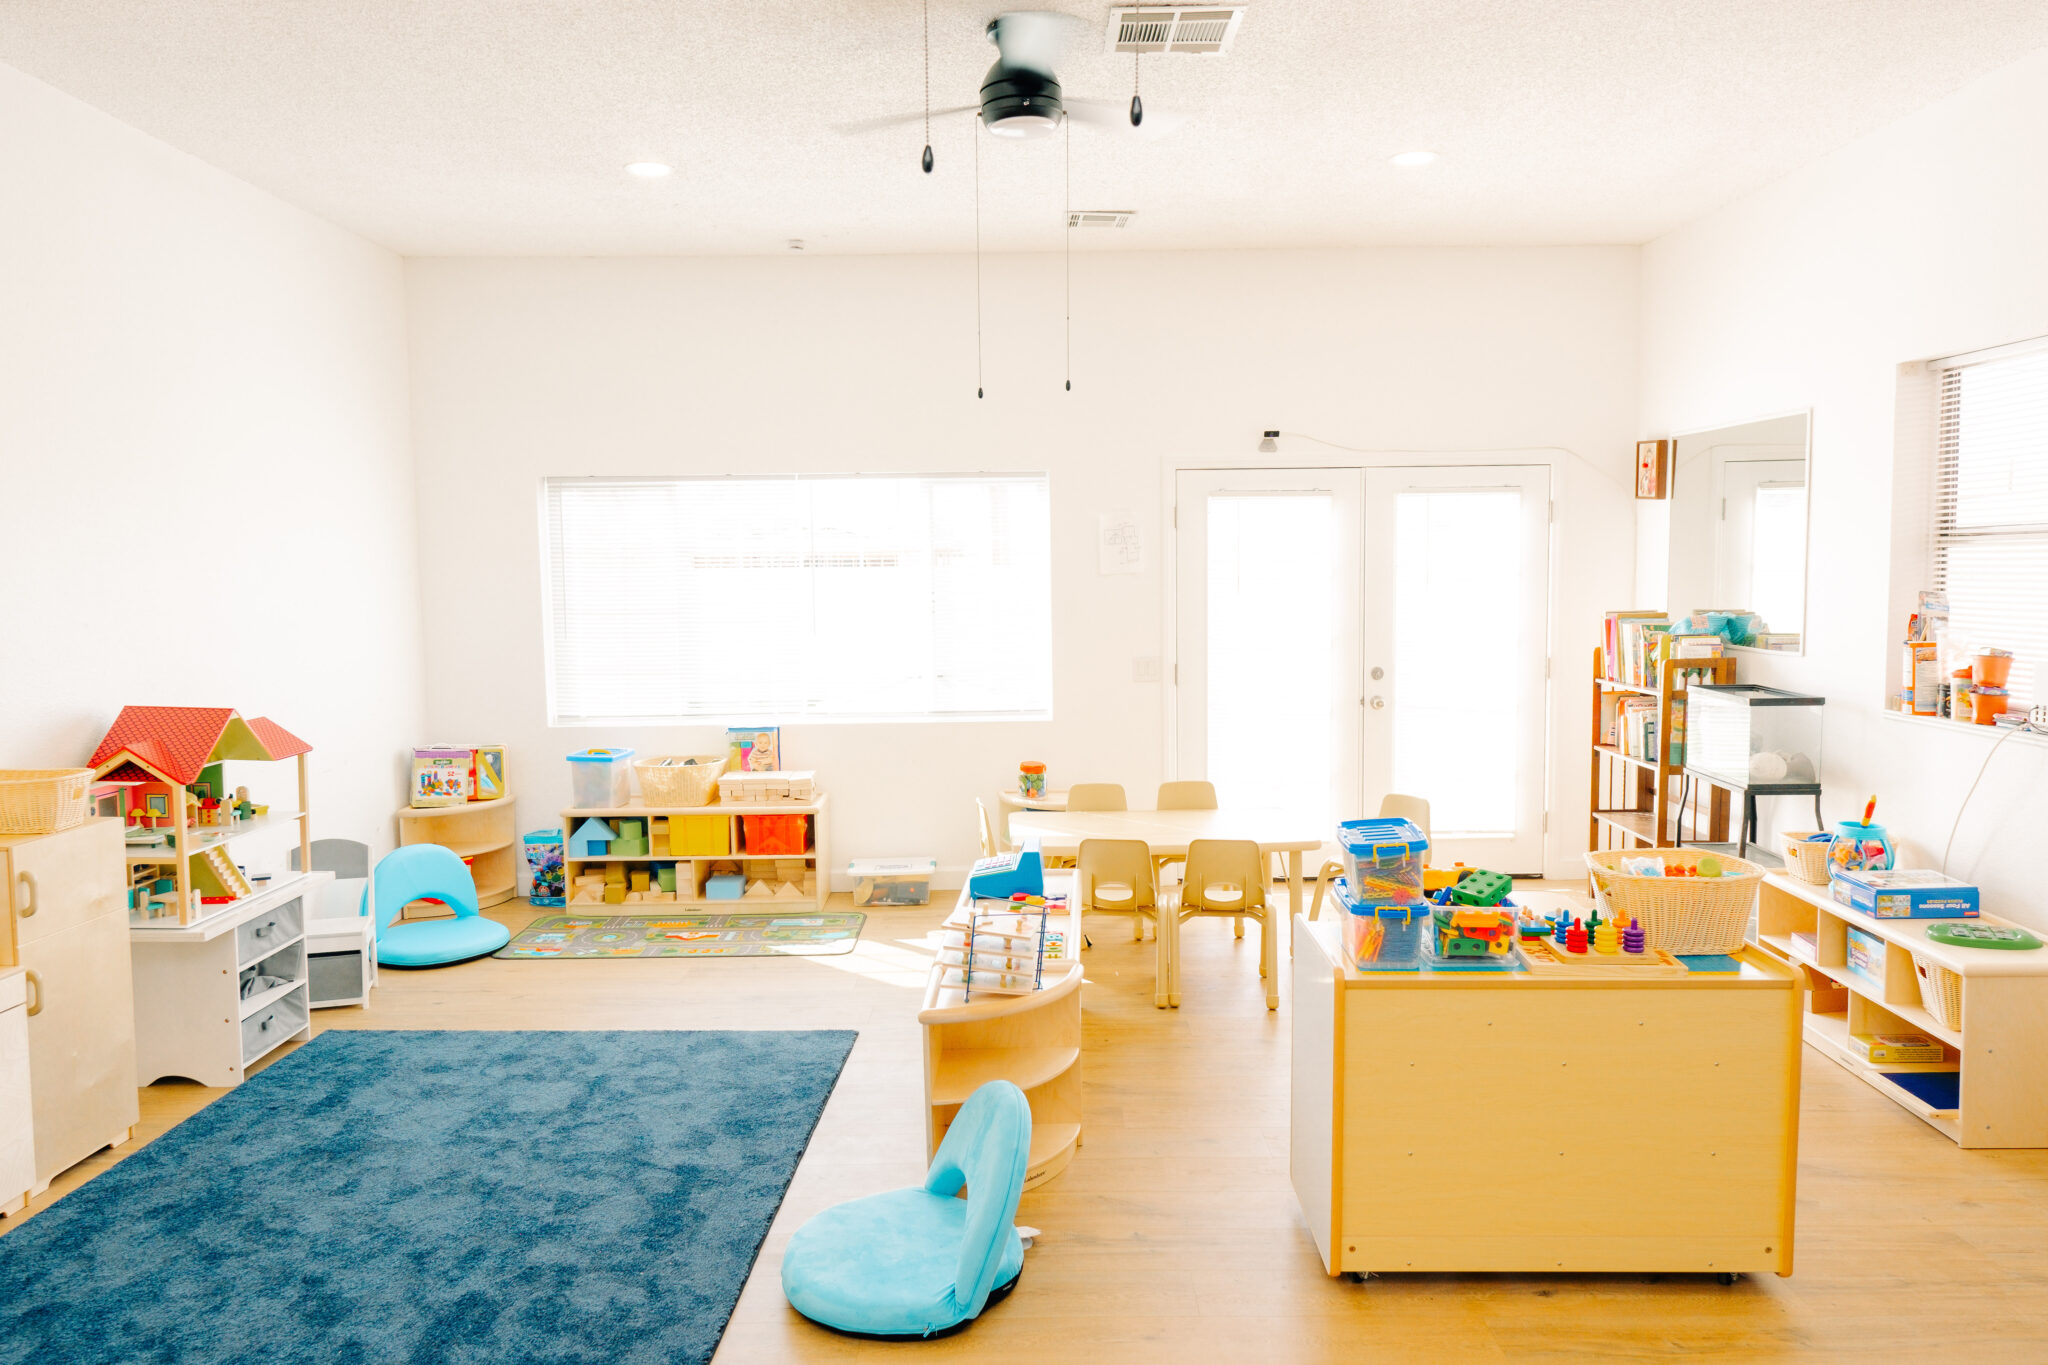 The primary child care area in a CARE home. Photo courtesy of Kathy Jacque.